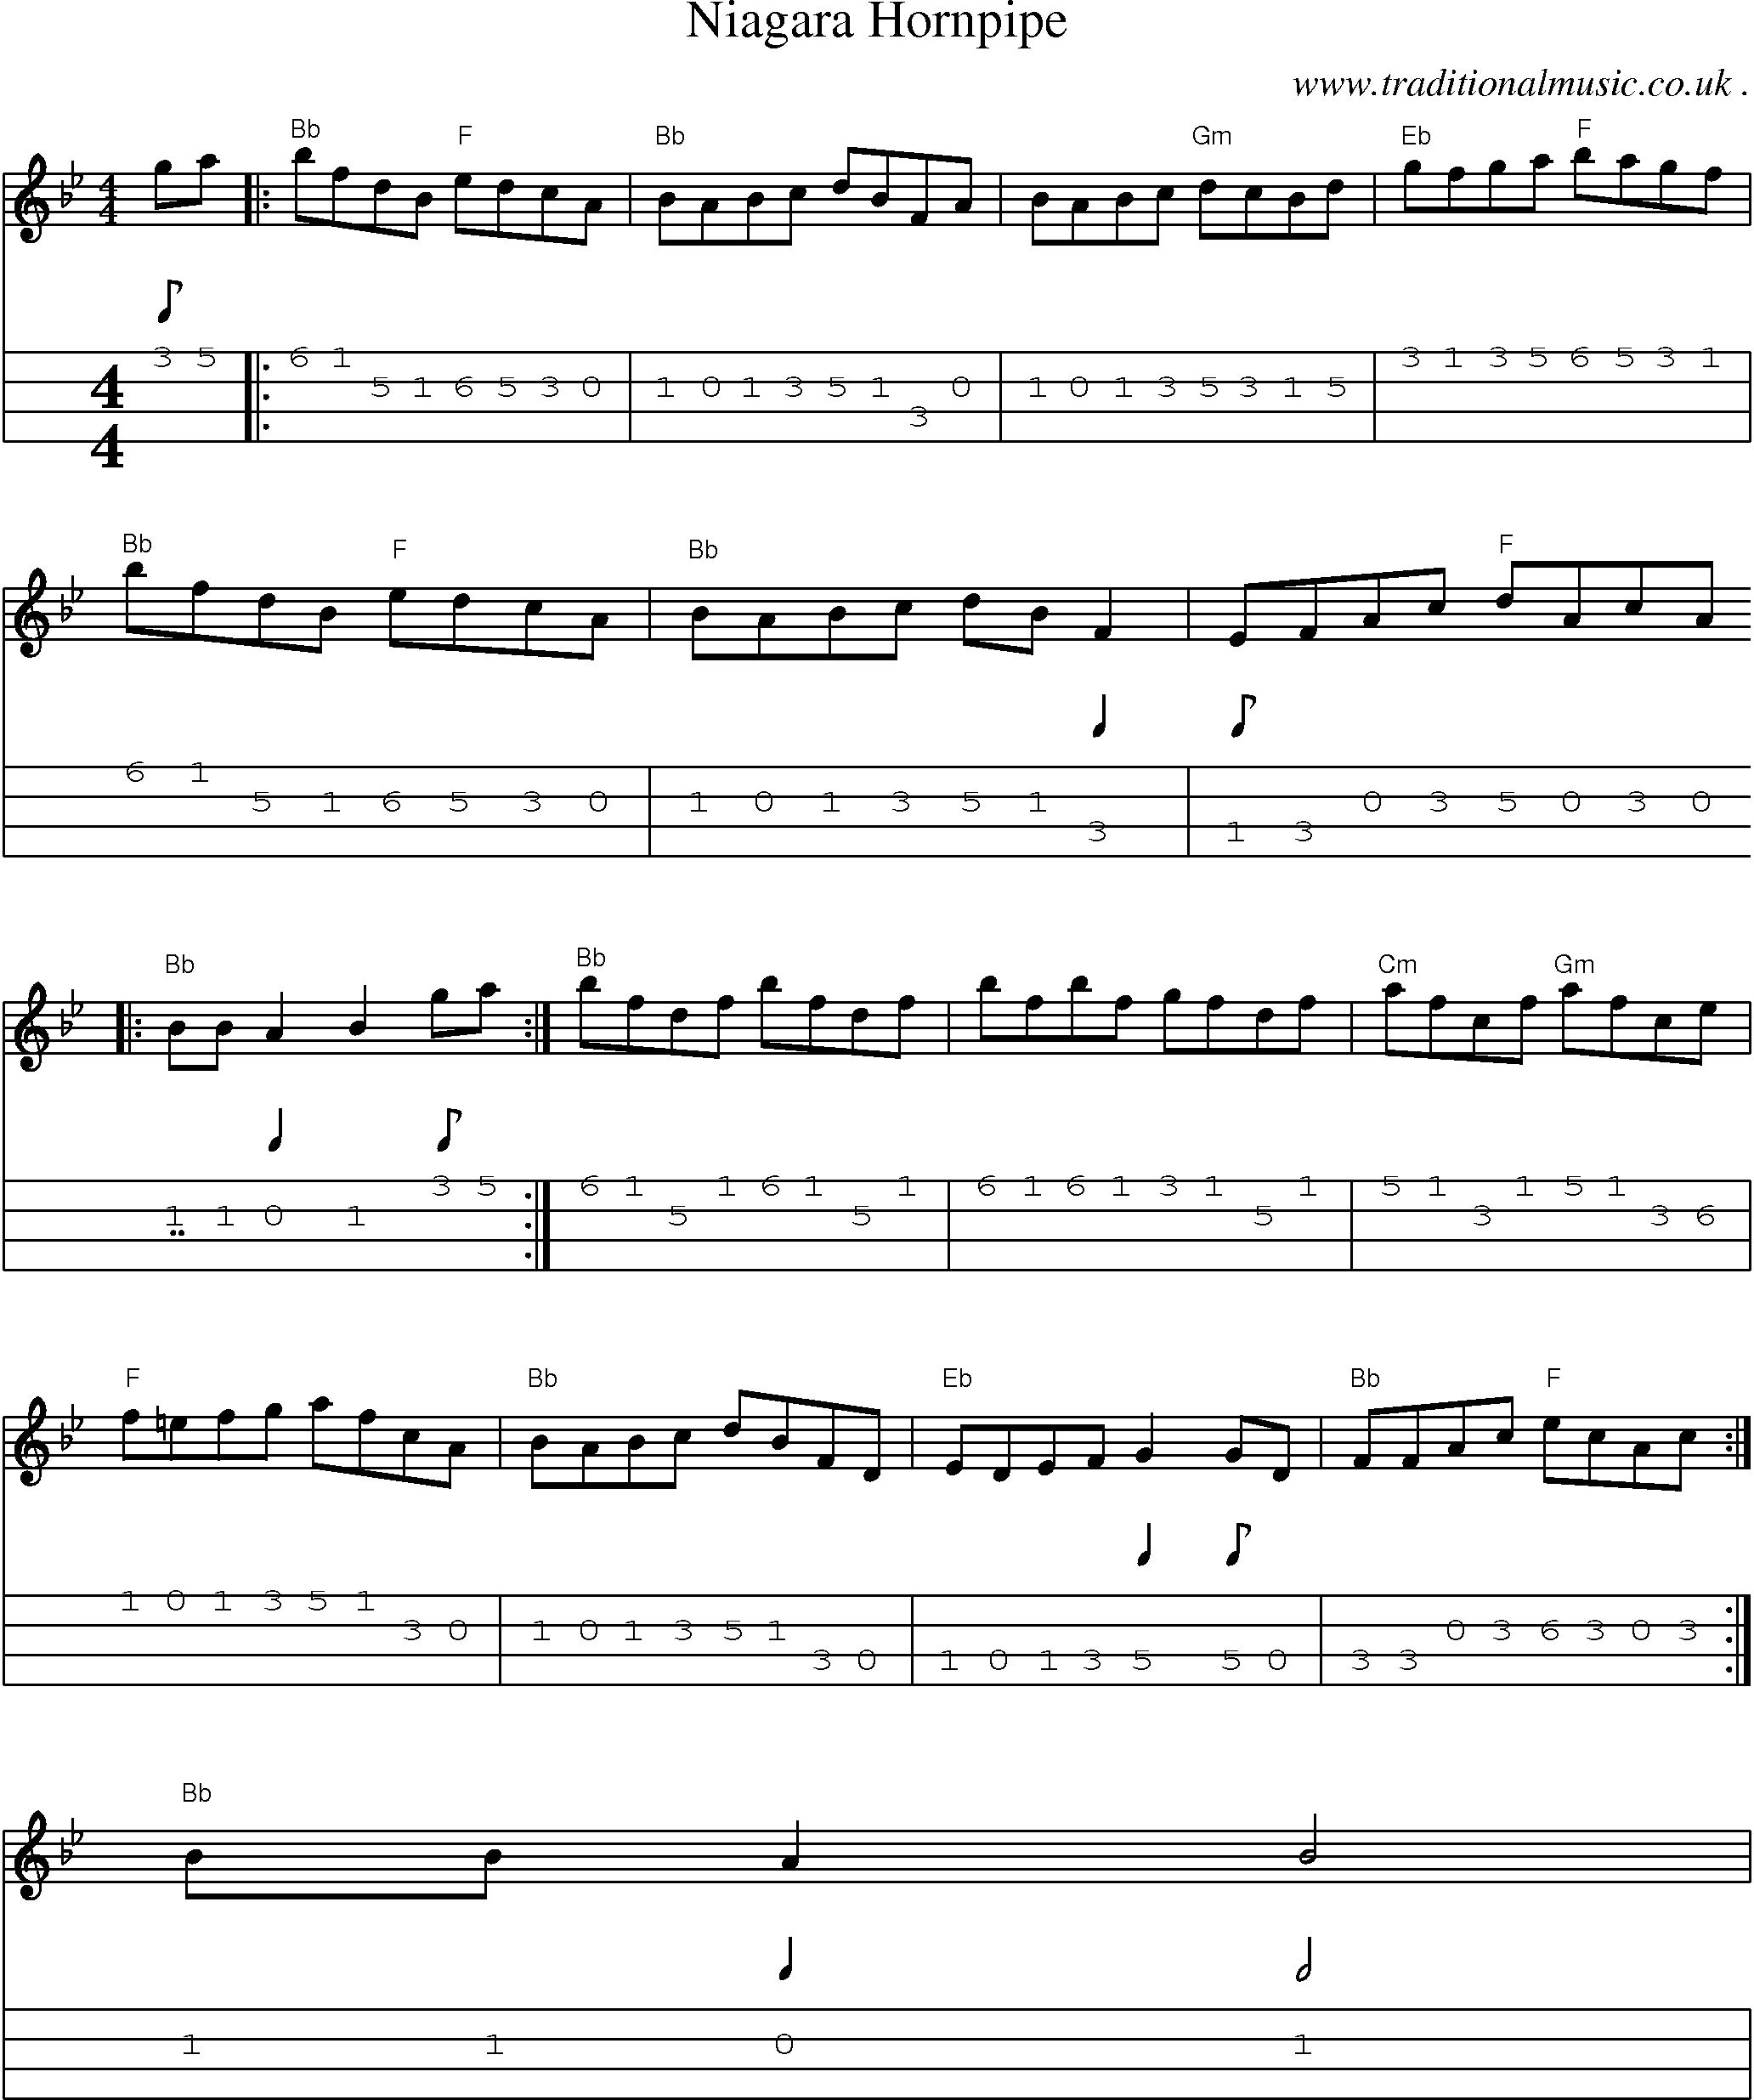 Music Score and Guitar Tabs for Niagara Hornpipe